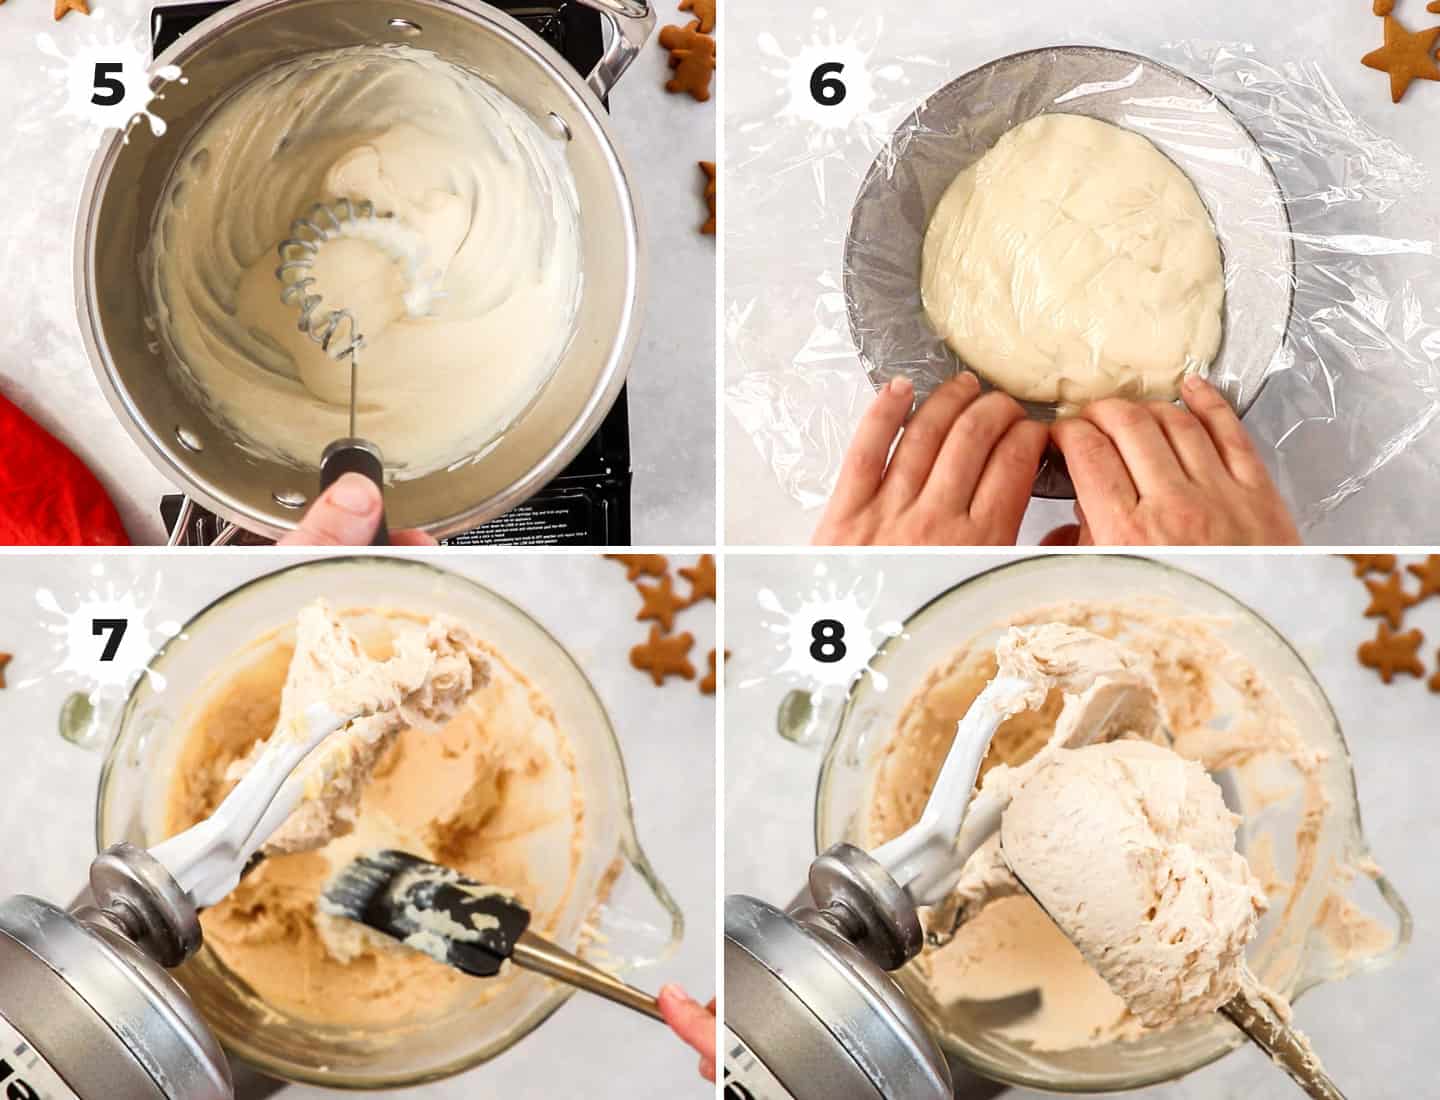 A collage of 4 images showing how to make the buttercream.